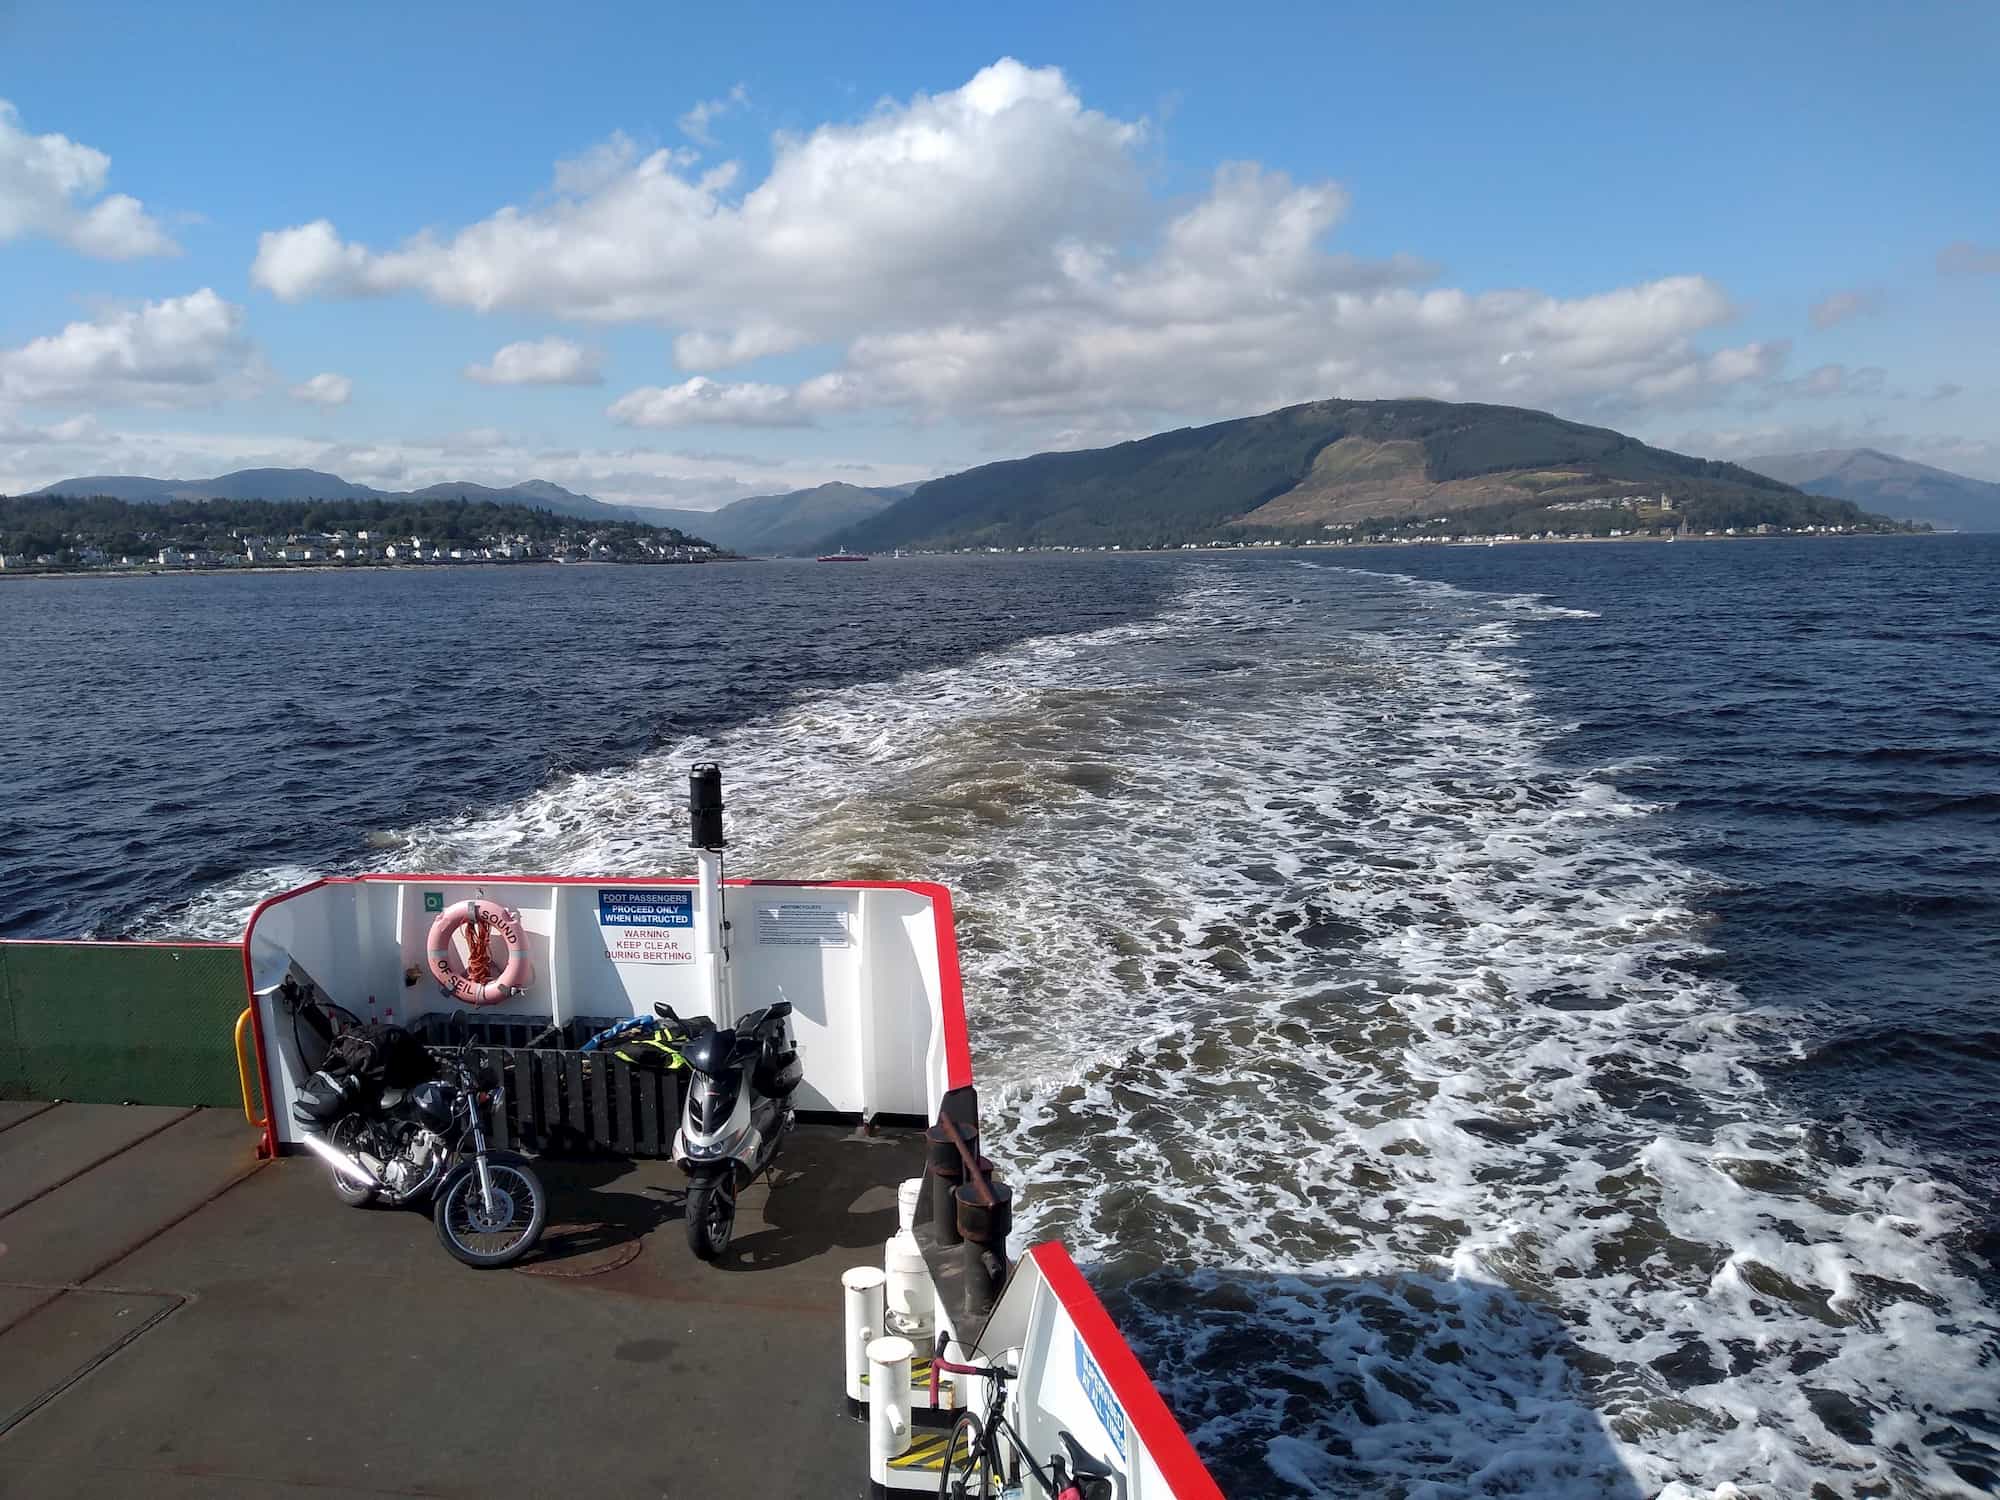 My motorbike on the back of a ferry, with coastal hills in the distance and lots of water turbulence behind the ferry